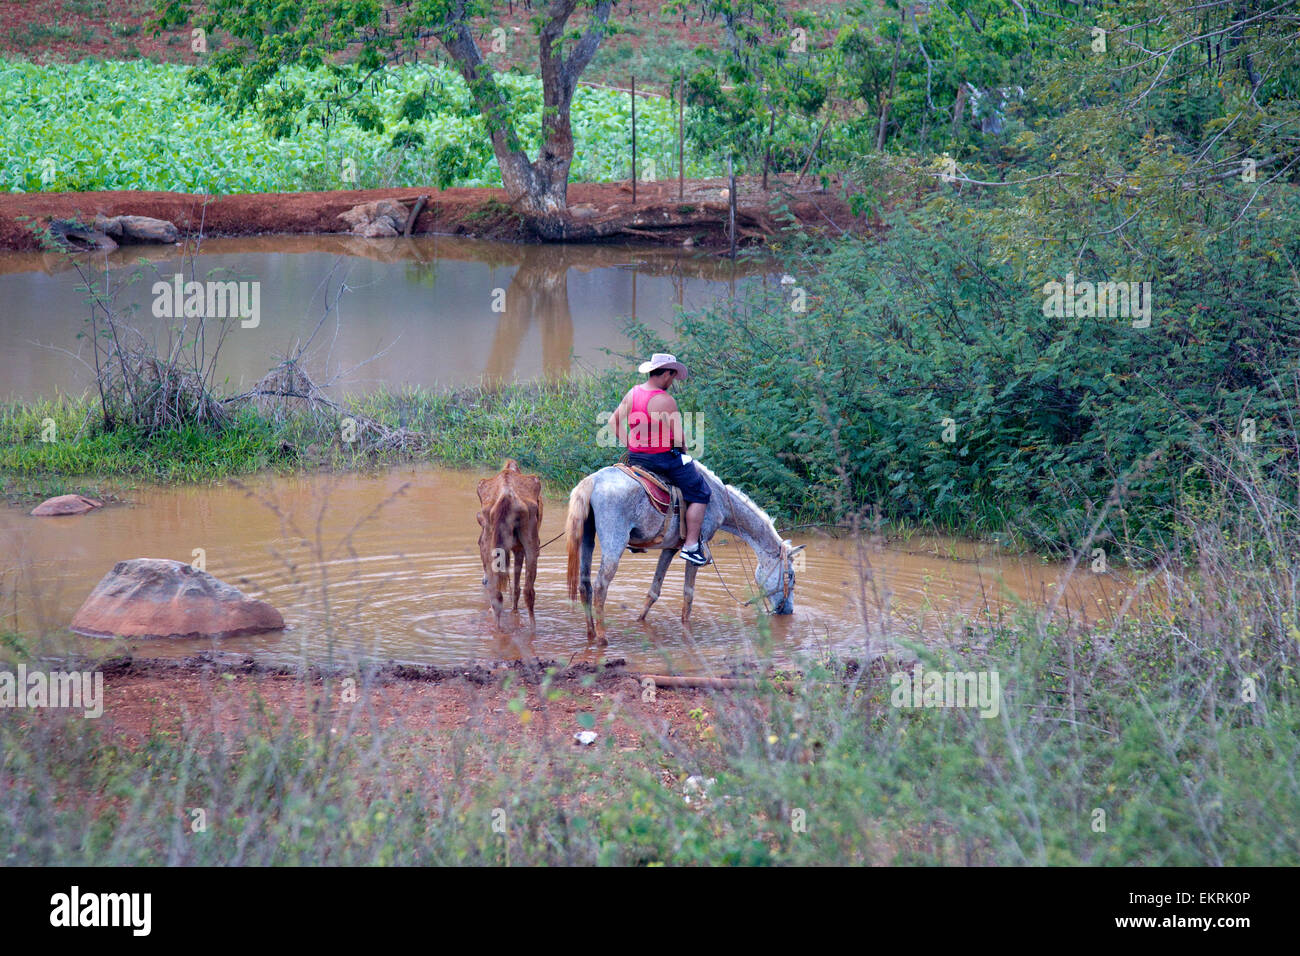 A horse drinks from a pond in agricultural land in Vinales, Cuba with crops and tobacco plantations Stock Photo